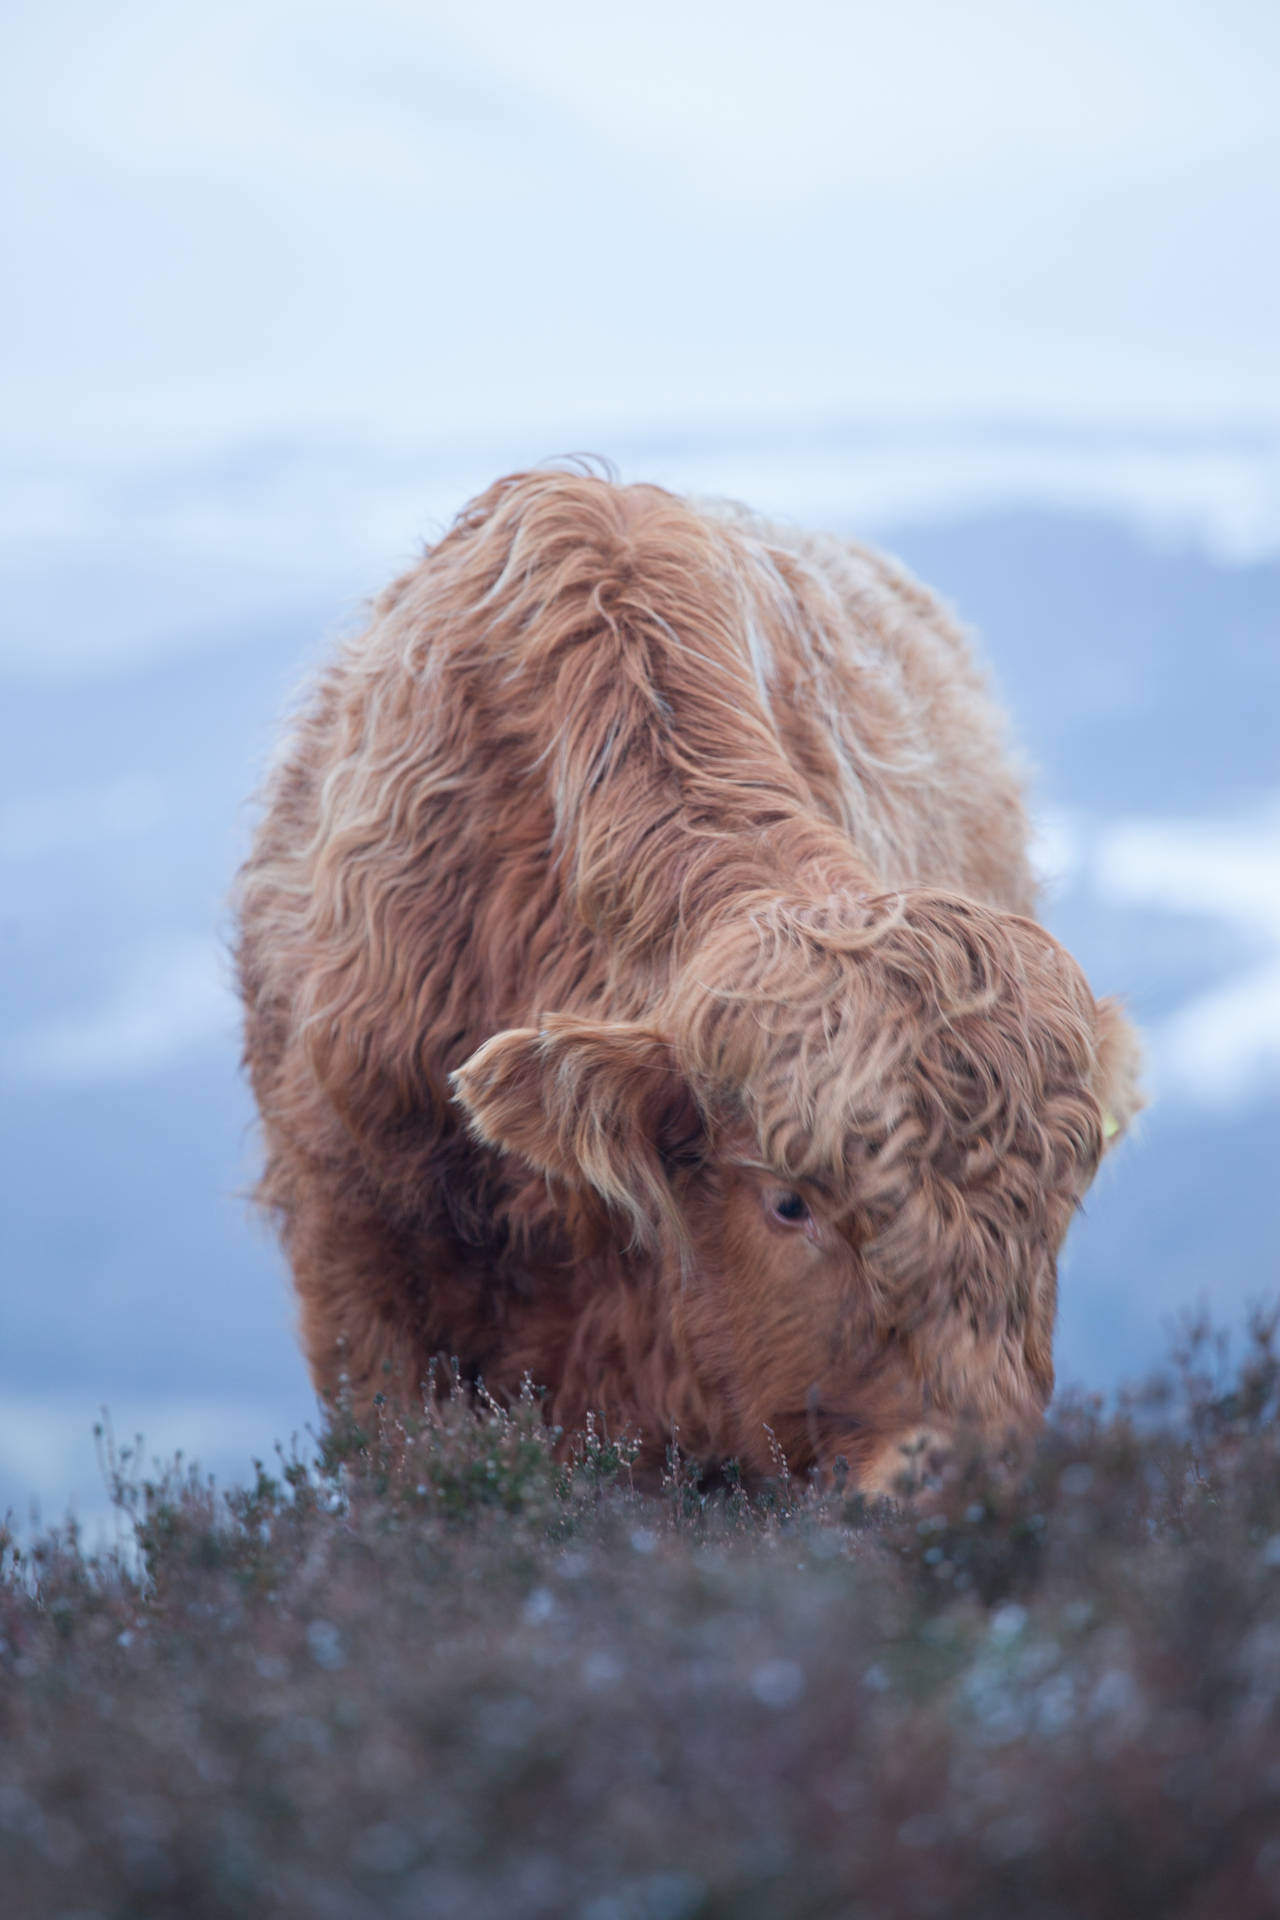 Cute Cow Eating Grass On Cold Mountain Background